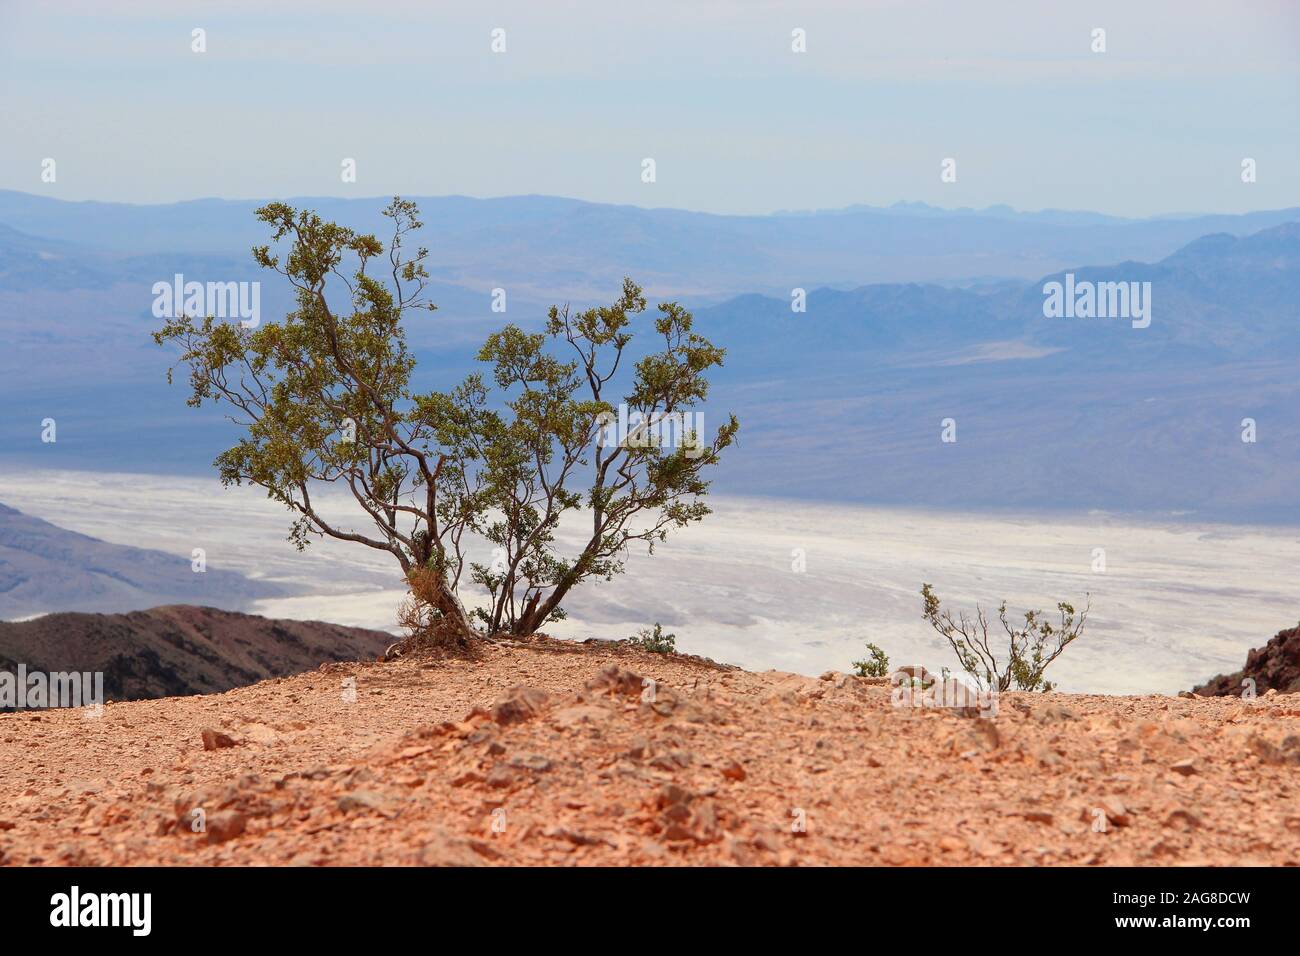 Single Mexican pinyon tree in a desert near the sea surrounded by high mountains Stock Photo